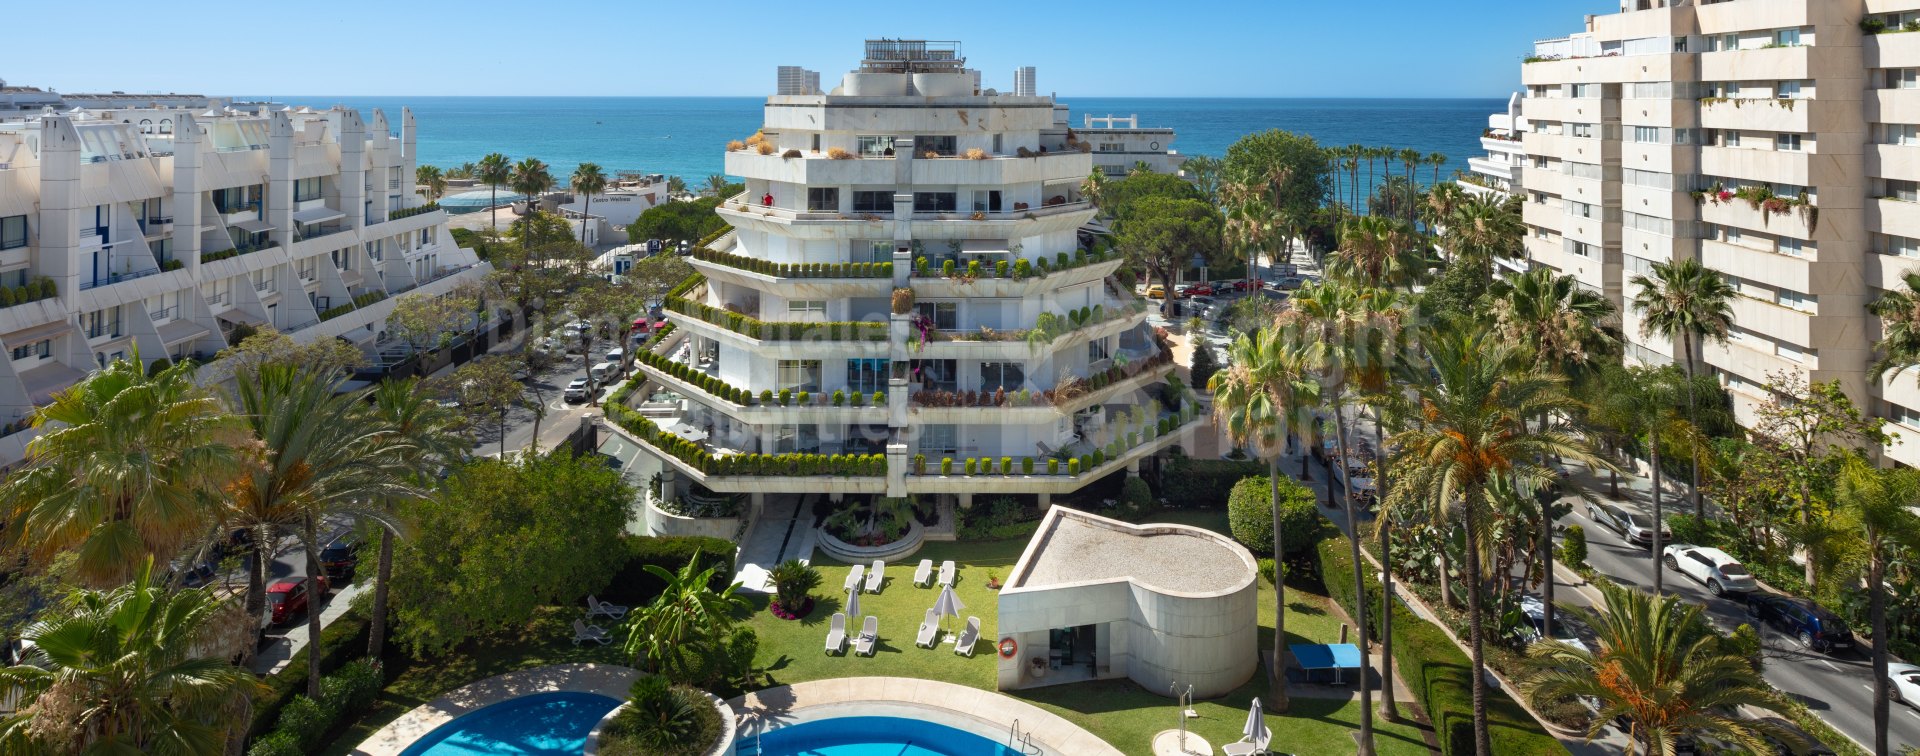 Marbella Centre, Spectacular duplex penthouse in the best address in Marbella town